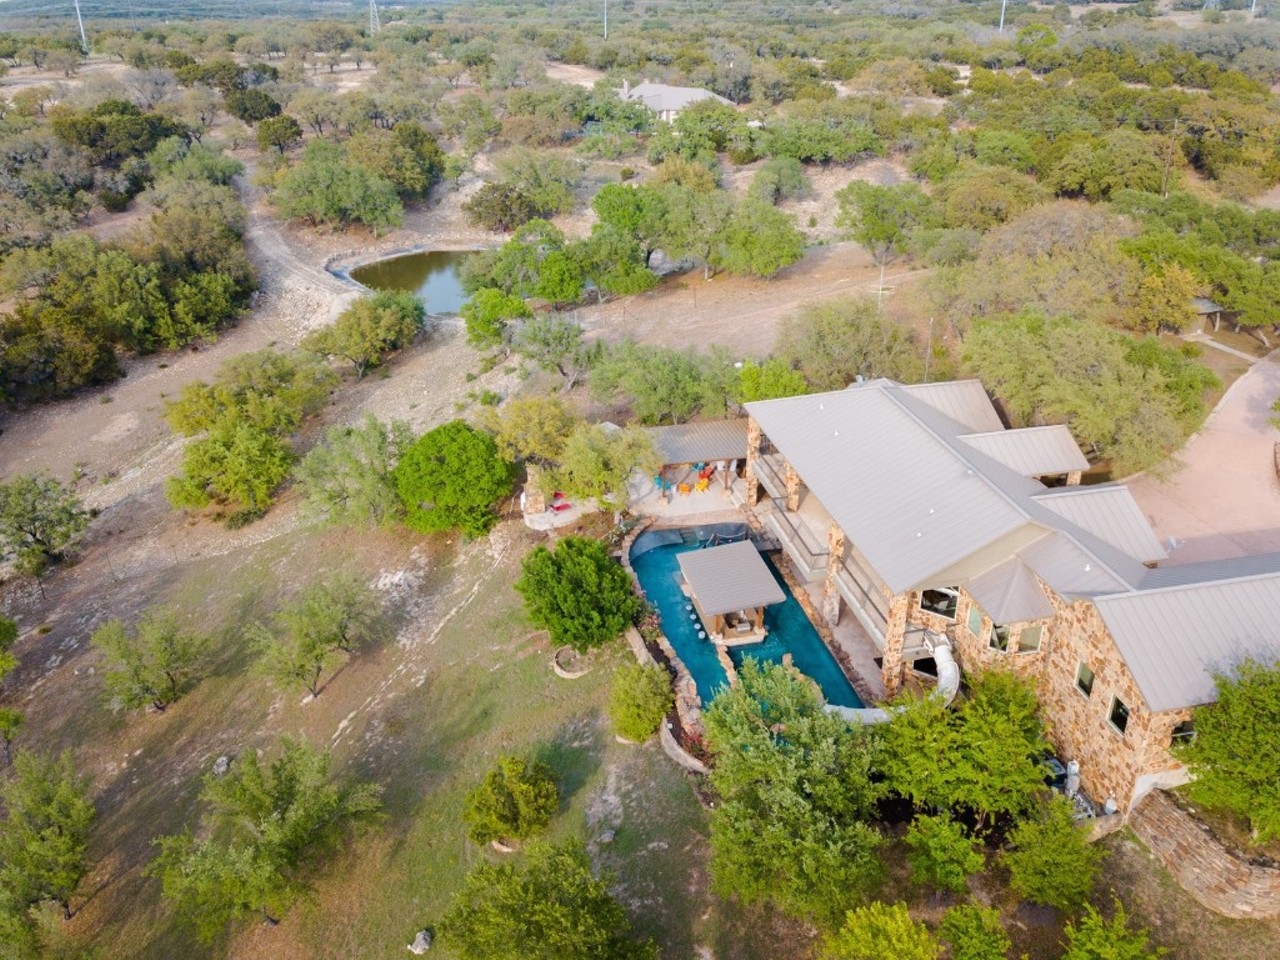 This Texas Hill Country mansion comes with a backyard lazy river and pool slide on its upper balcony